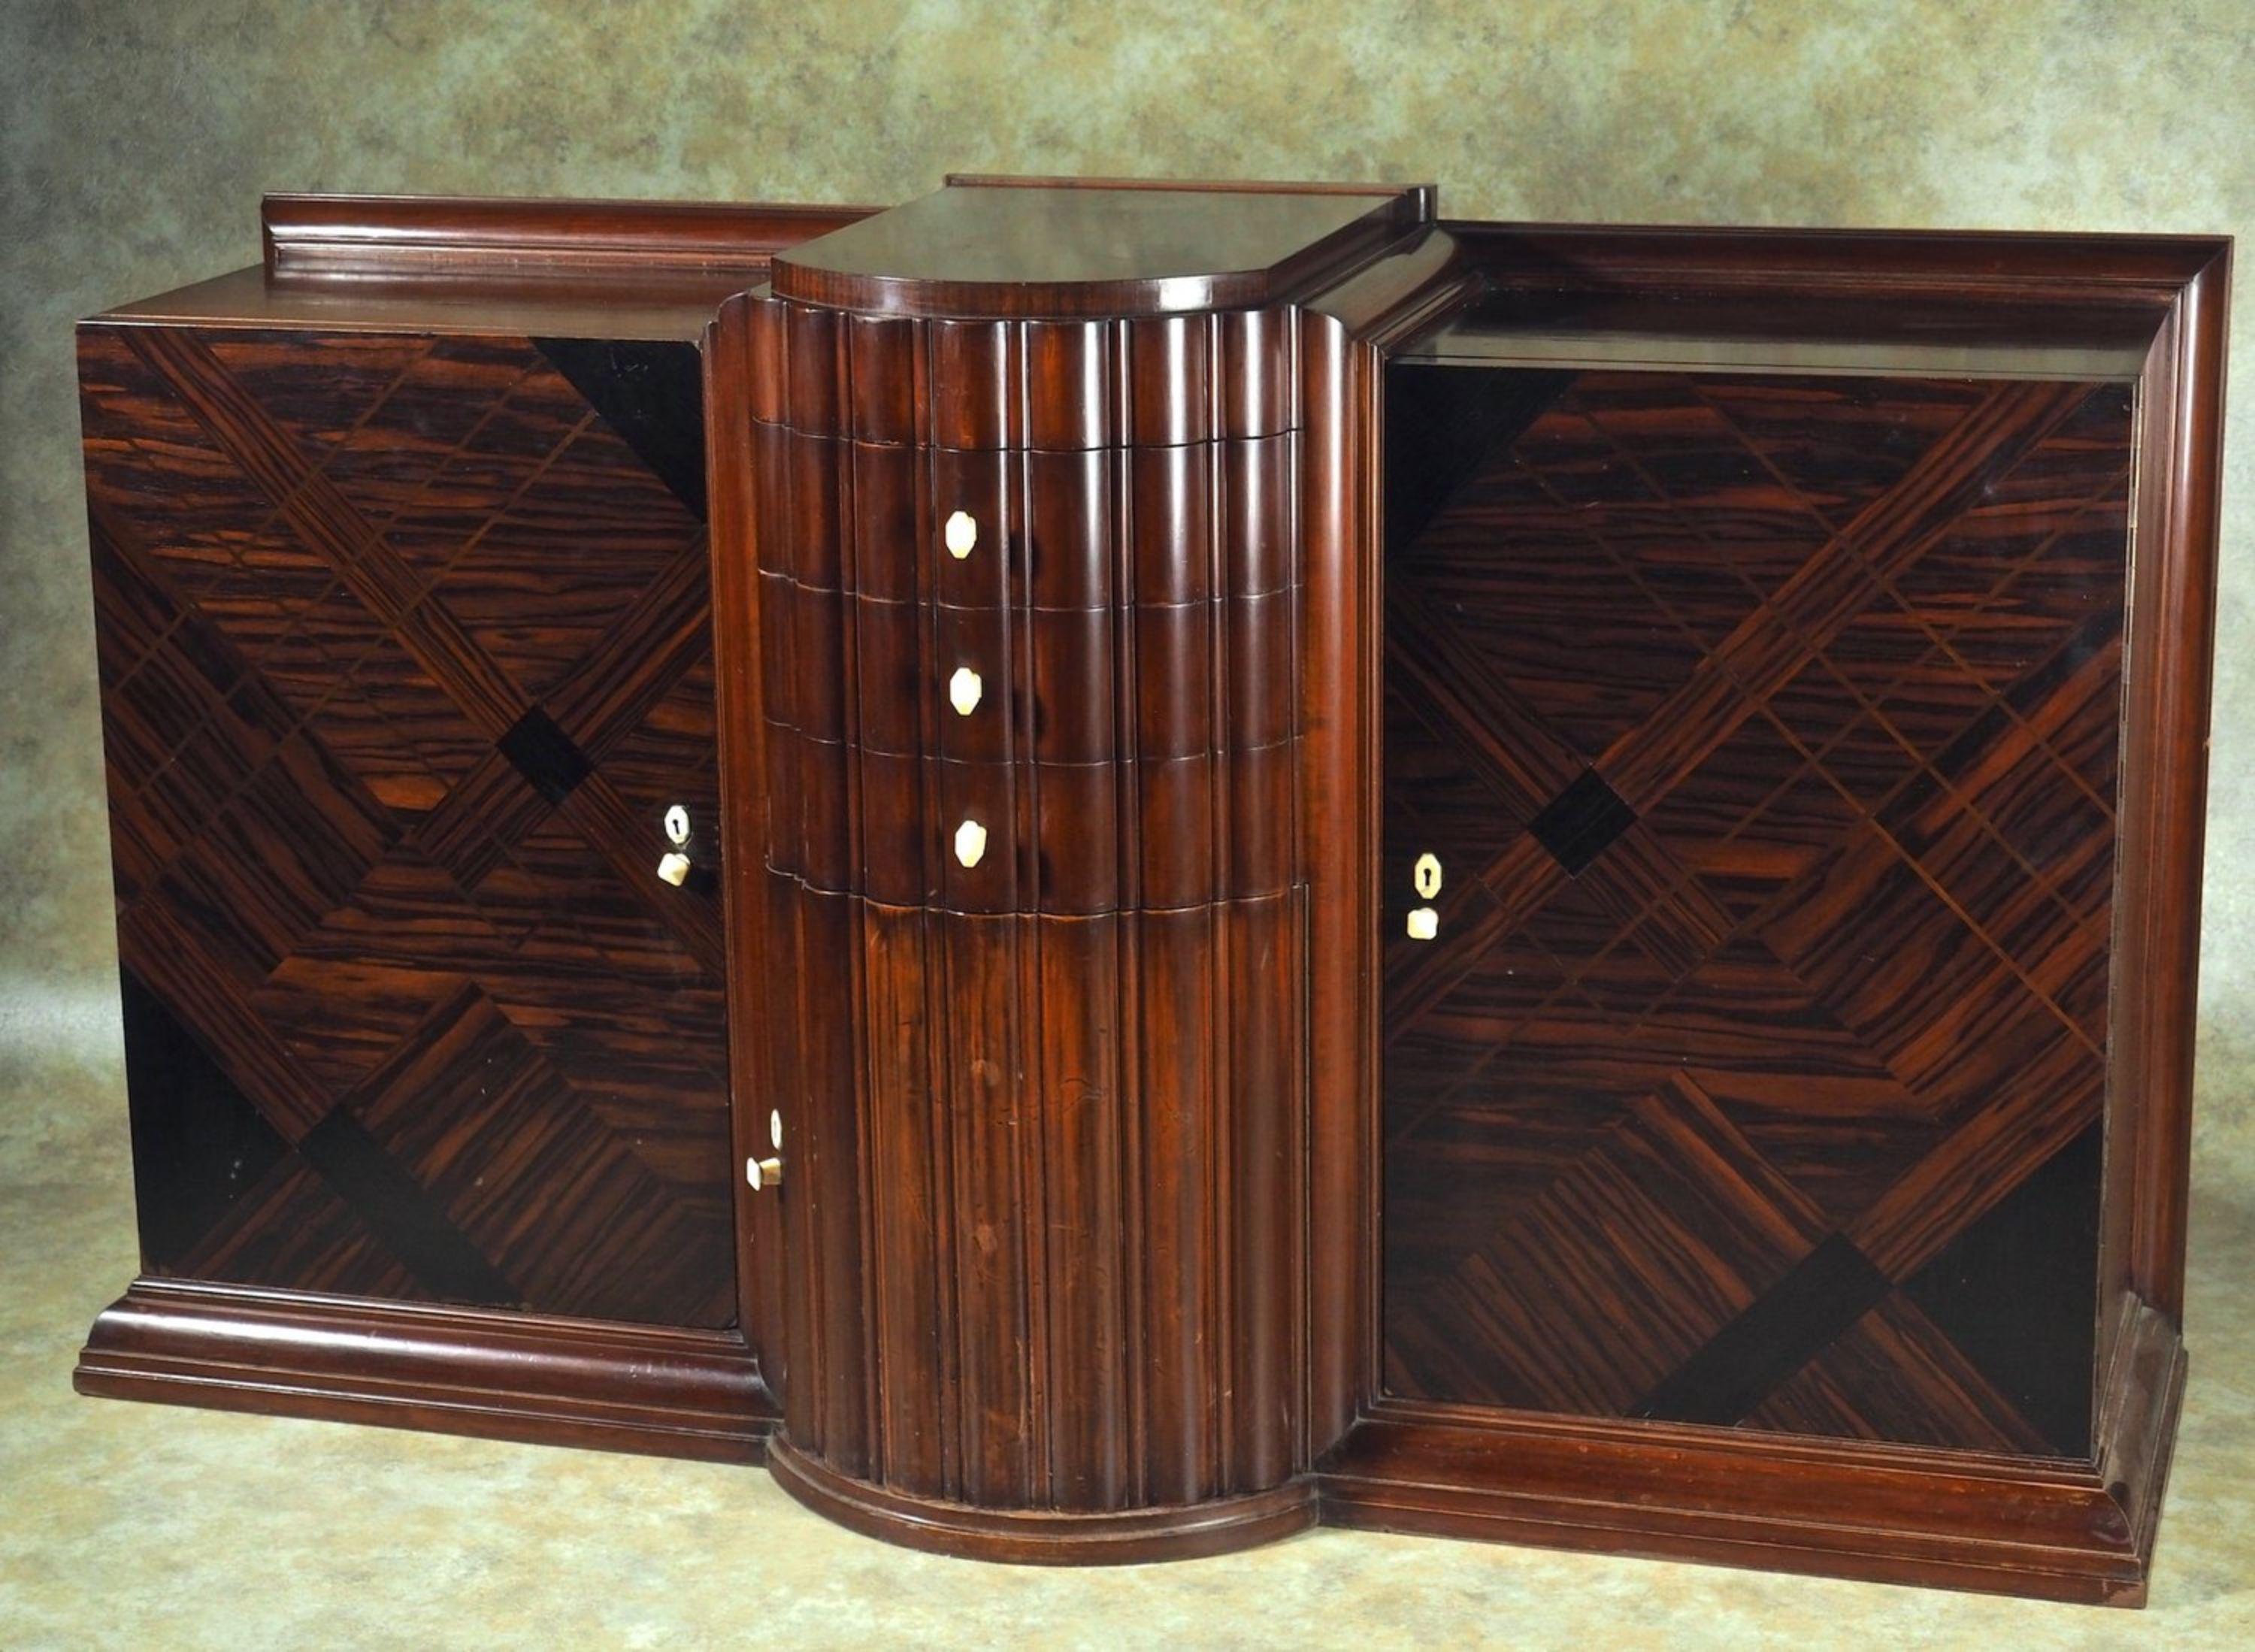 French Modernist Art Deco cabinet by DIM (Joubert et Petit) in rosewood and mahogany, with Bakelite escutcheons and pulls. Model presented at the 1926 Salon des Artistes Decorateurs in Paris and pictured in the exhibition portfolio. Measures: 70